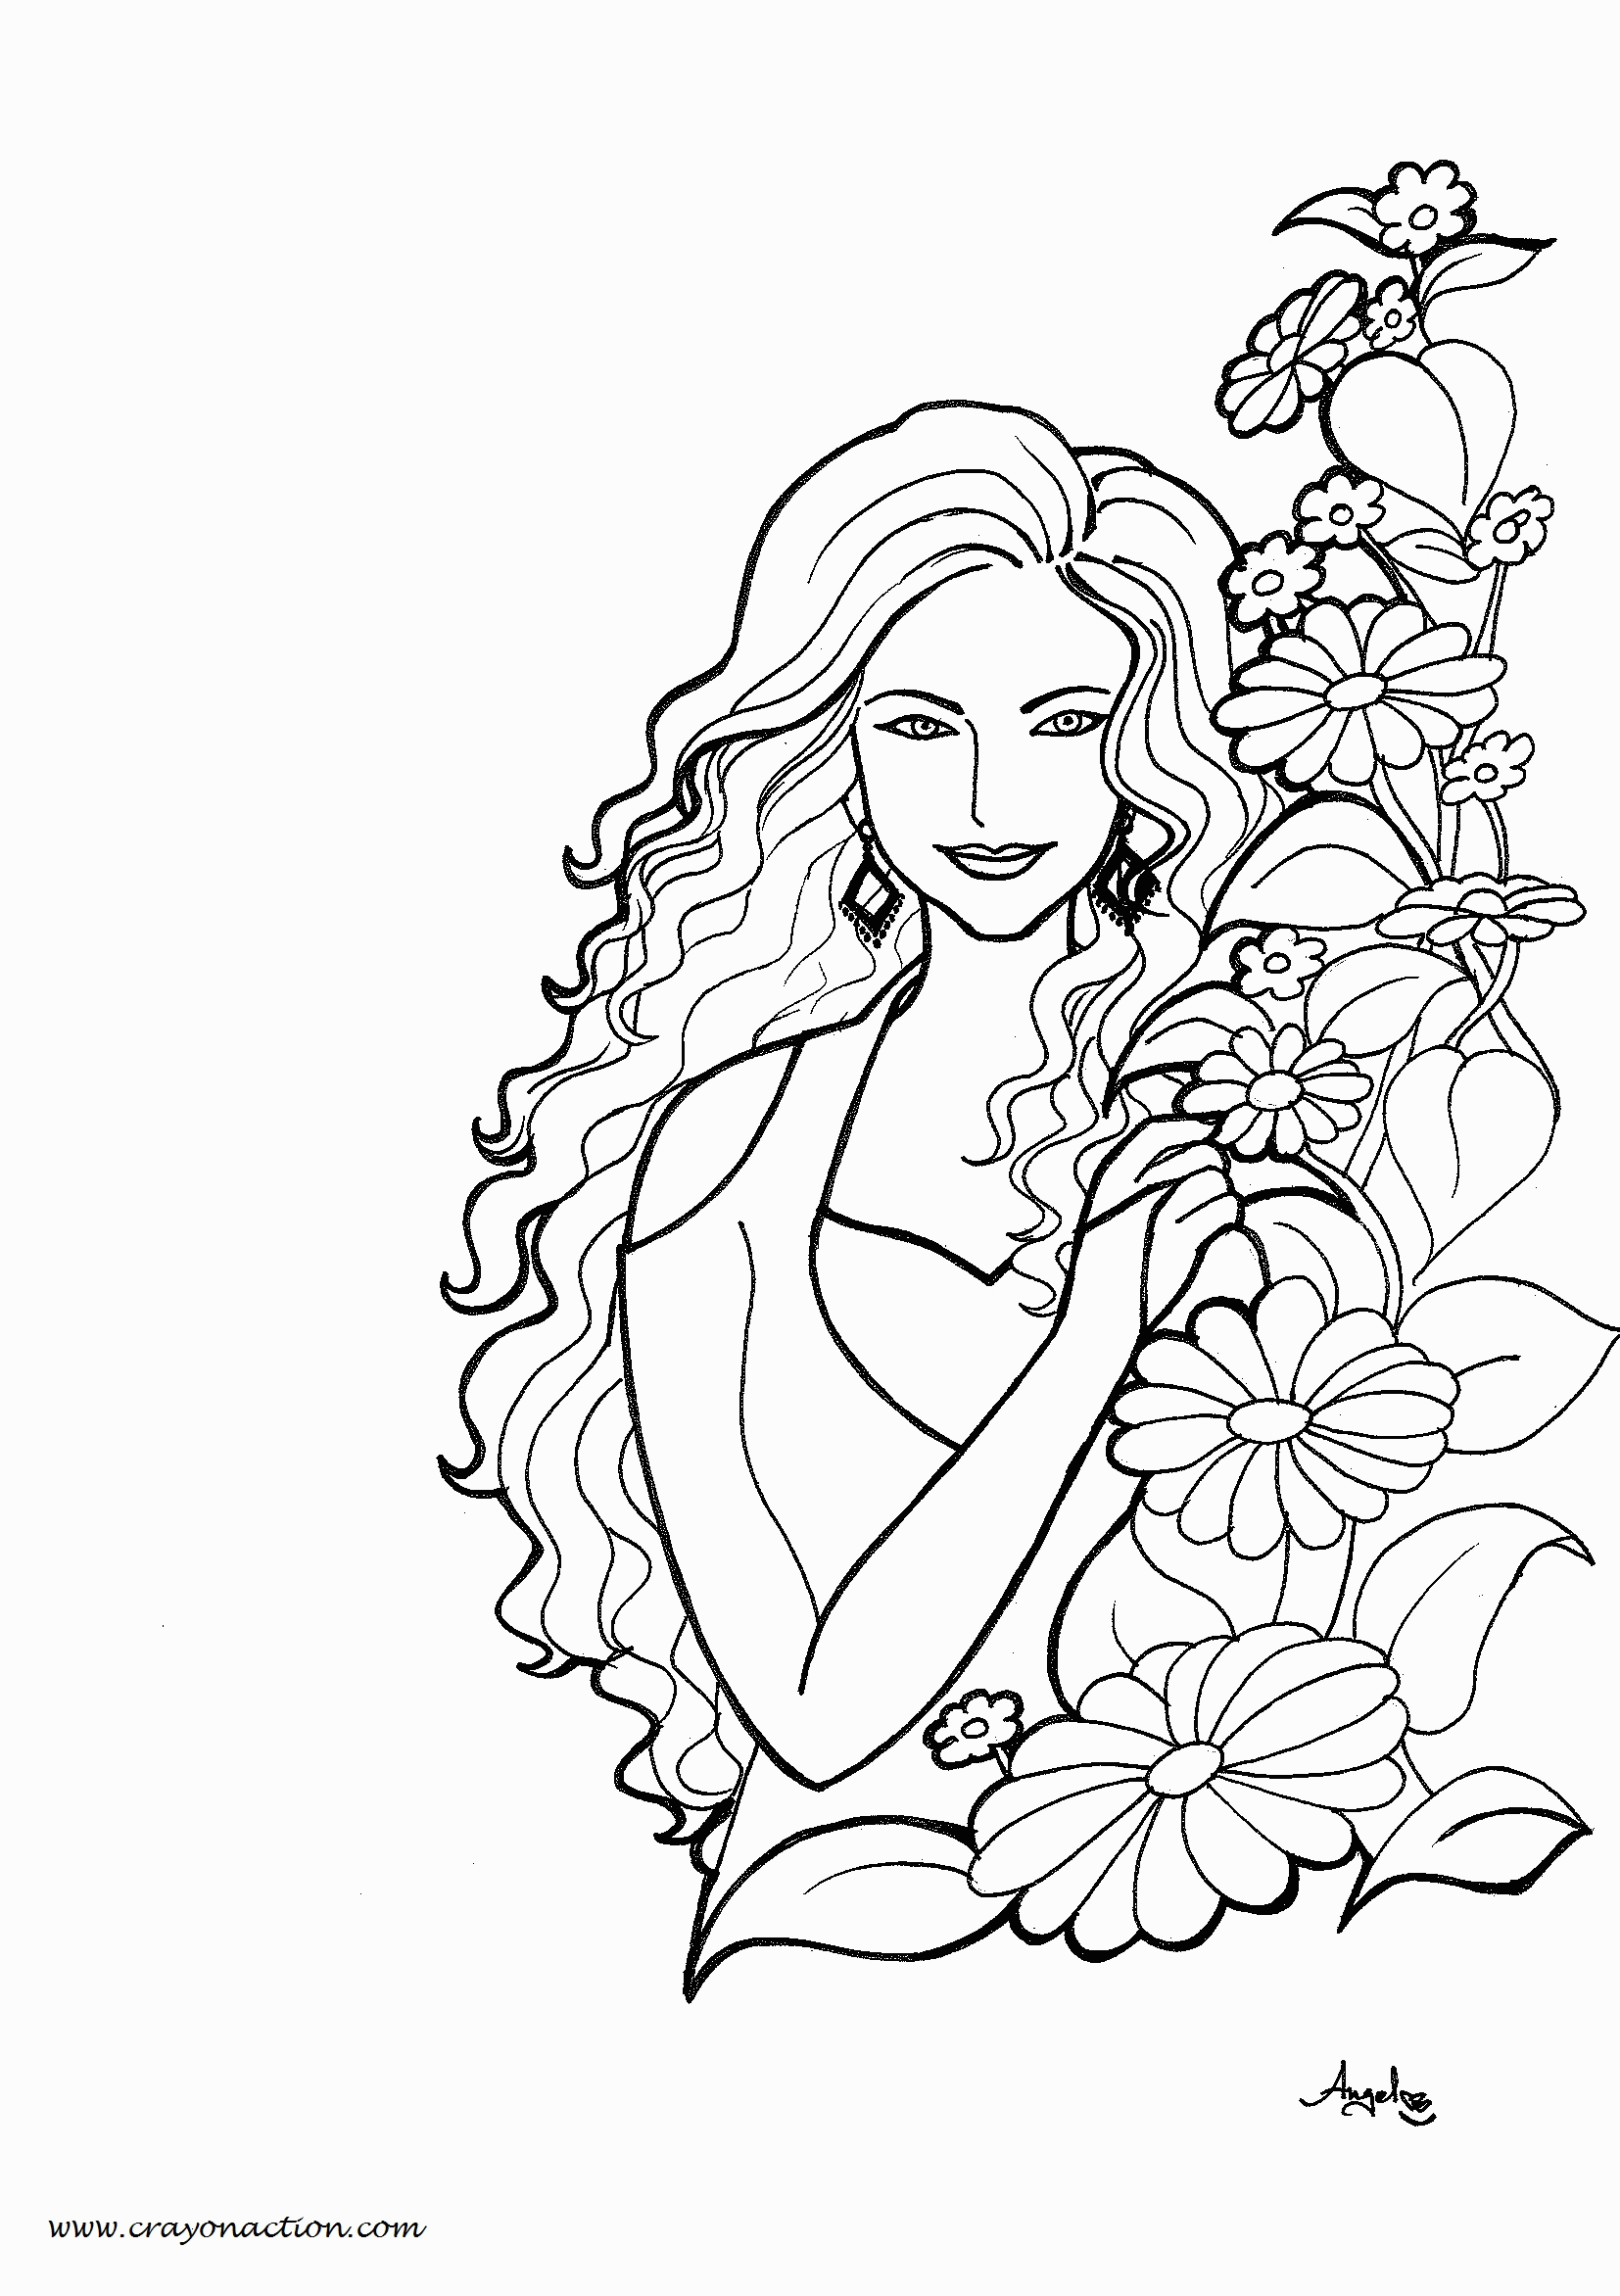 11 Pics Of Beautiful Women Coloring Pages Beautiful Adult Coloring Home